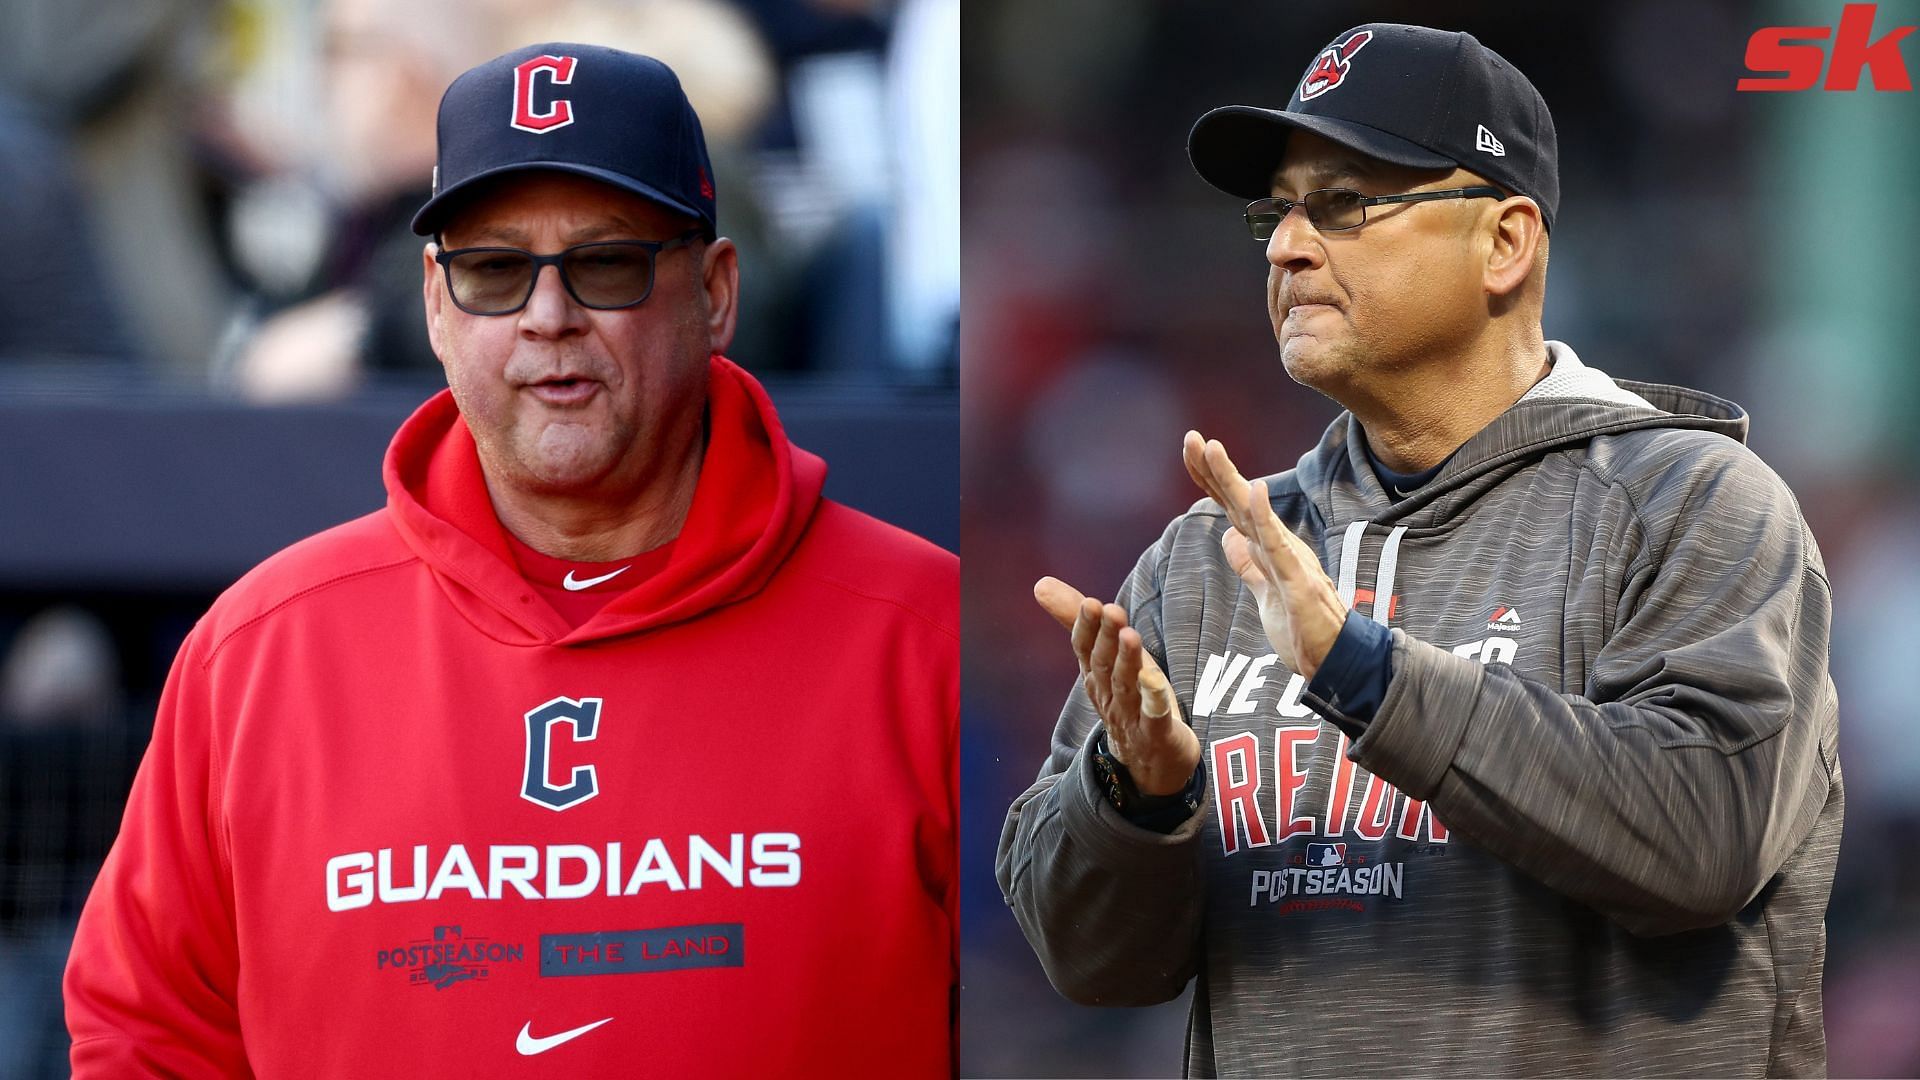 Cleveland Guardians manager Terry Francona is one of the best managers in MLB, says MLB podcaster.